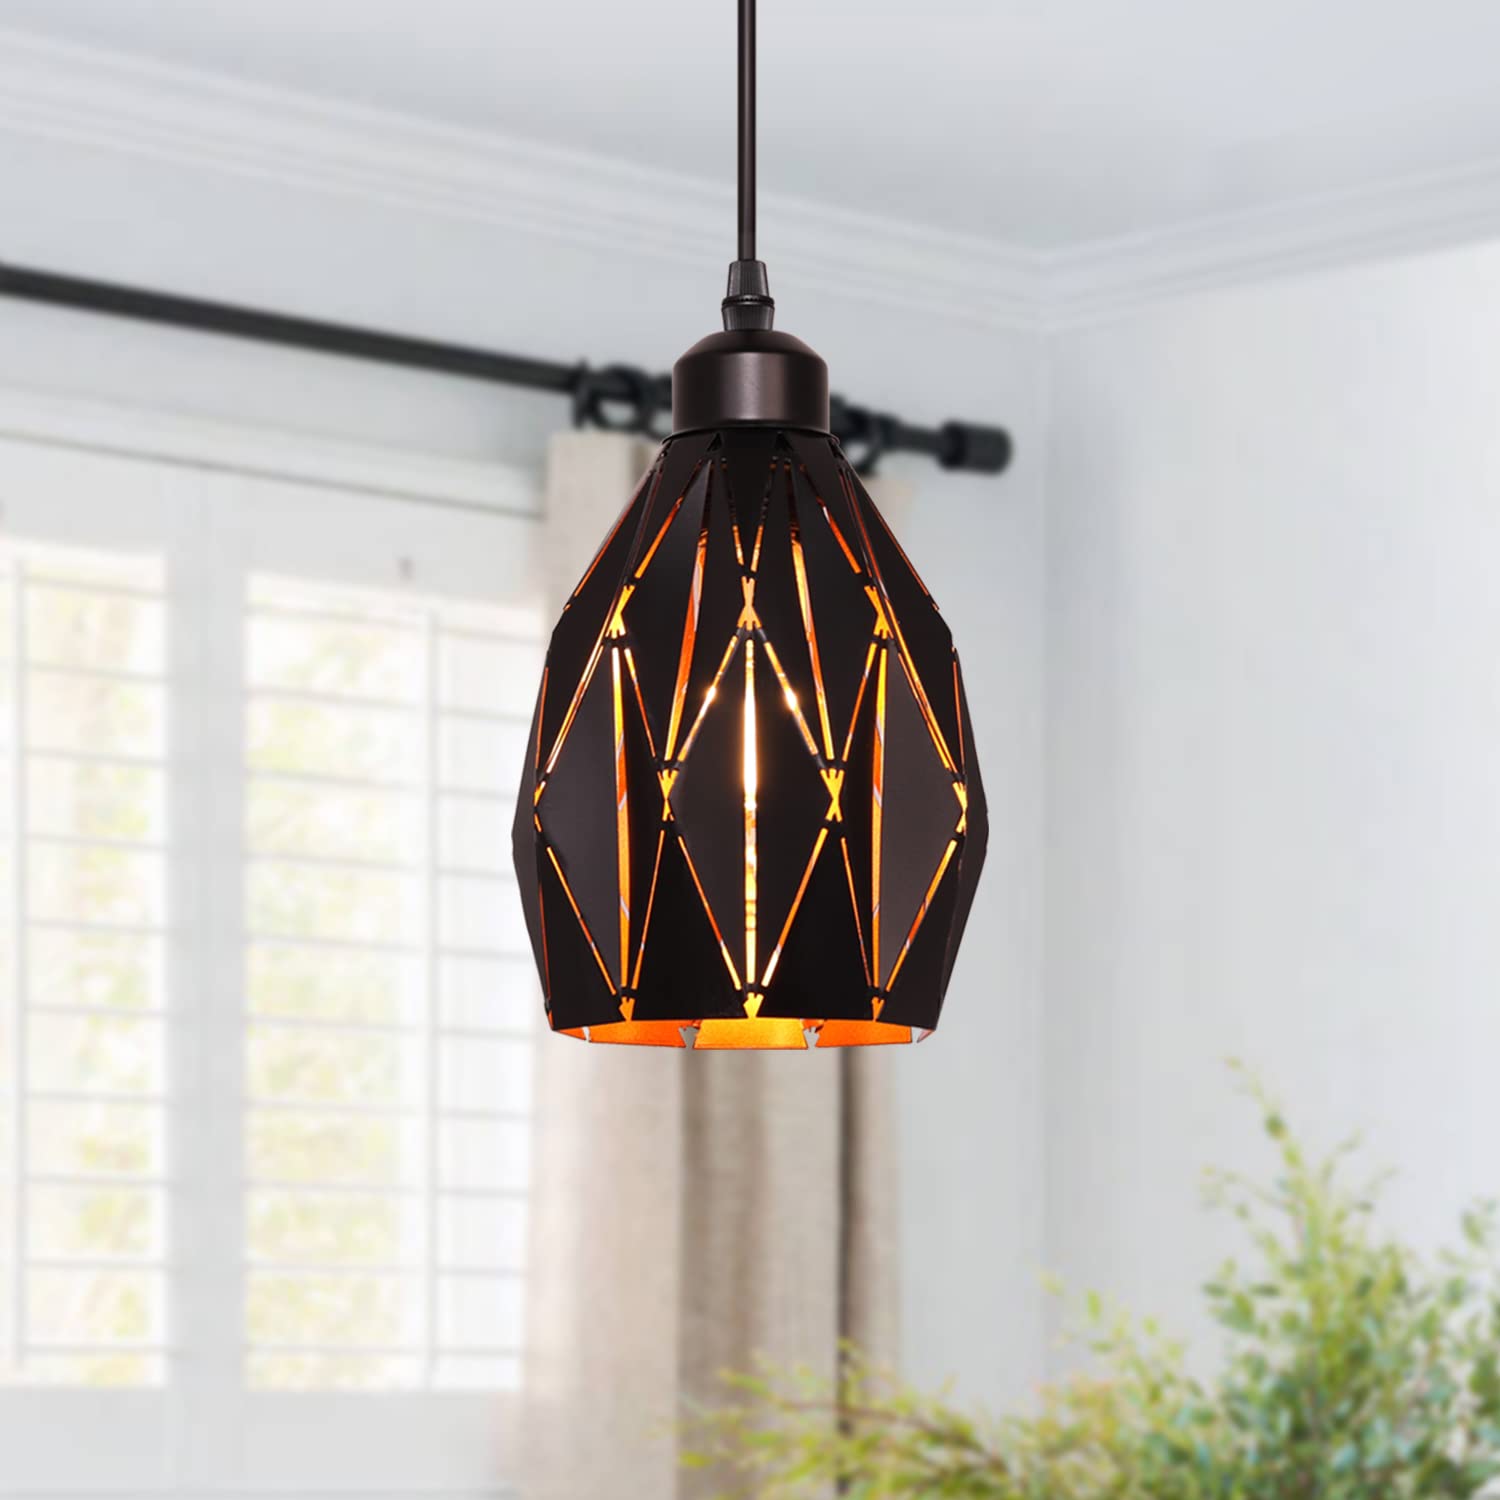 Retro Pendant Light Fixtures 3 Pack Industrial Pendant Lighting Adjustable Hanging Light Fixtures with Geometric Black Metal Shade Farmhouse Pendant Light Ceiling Lamp for Kitchen Island